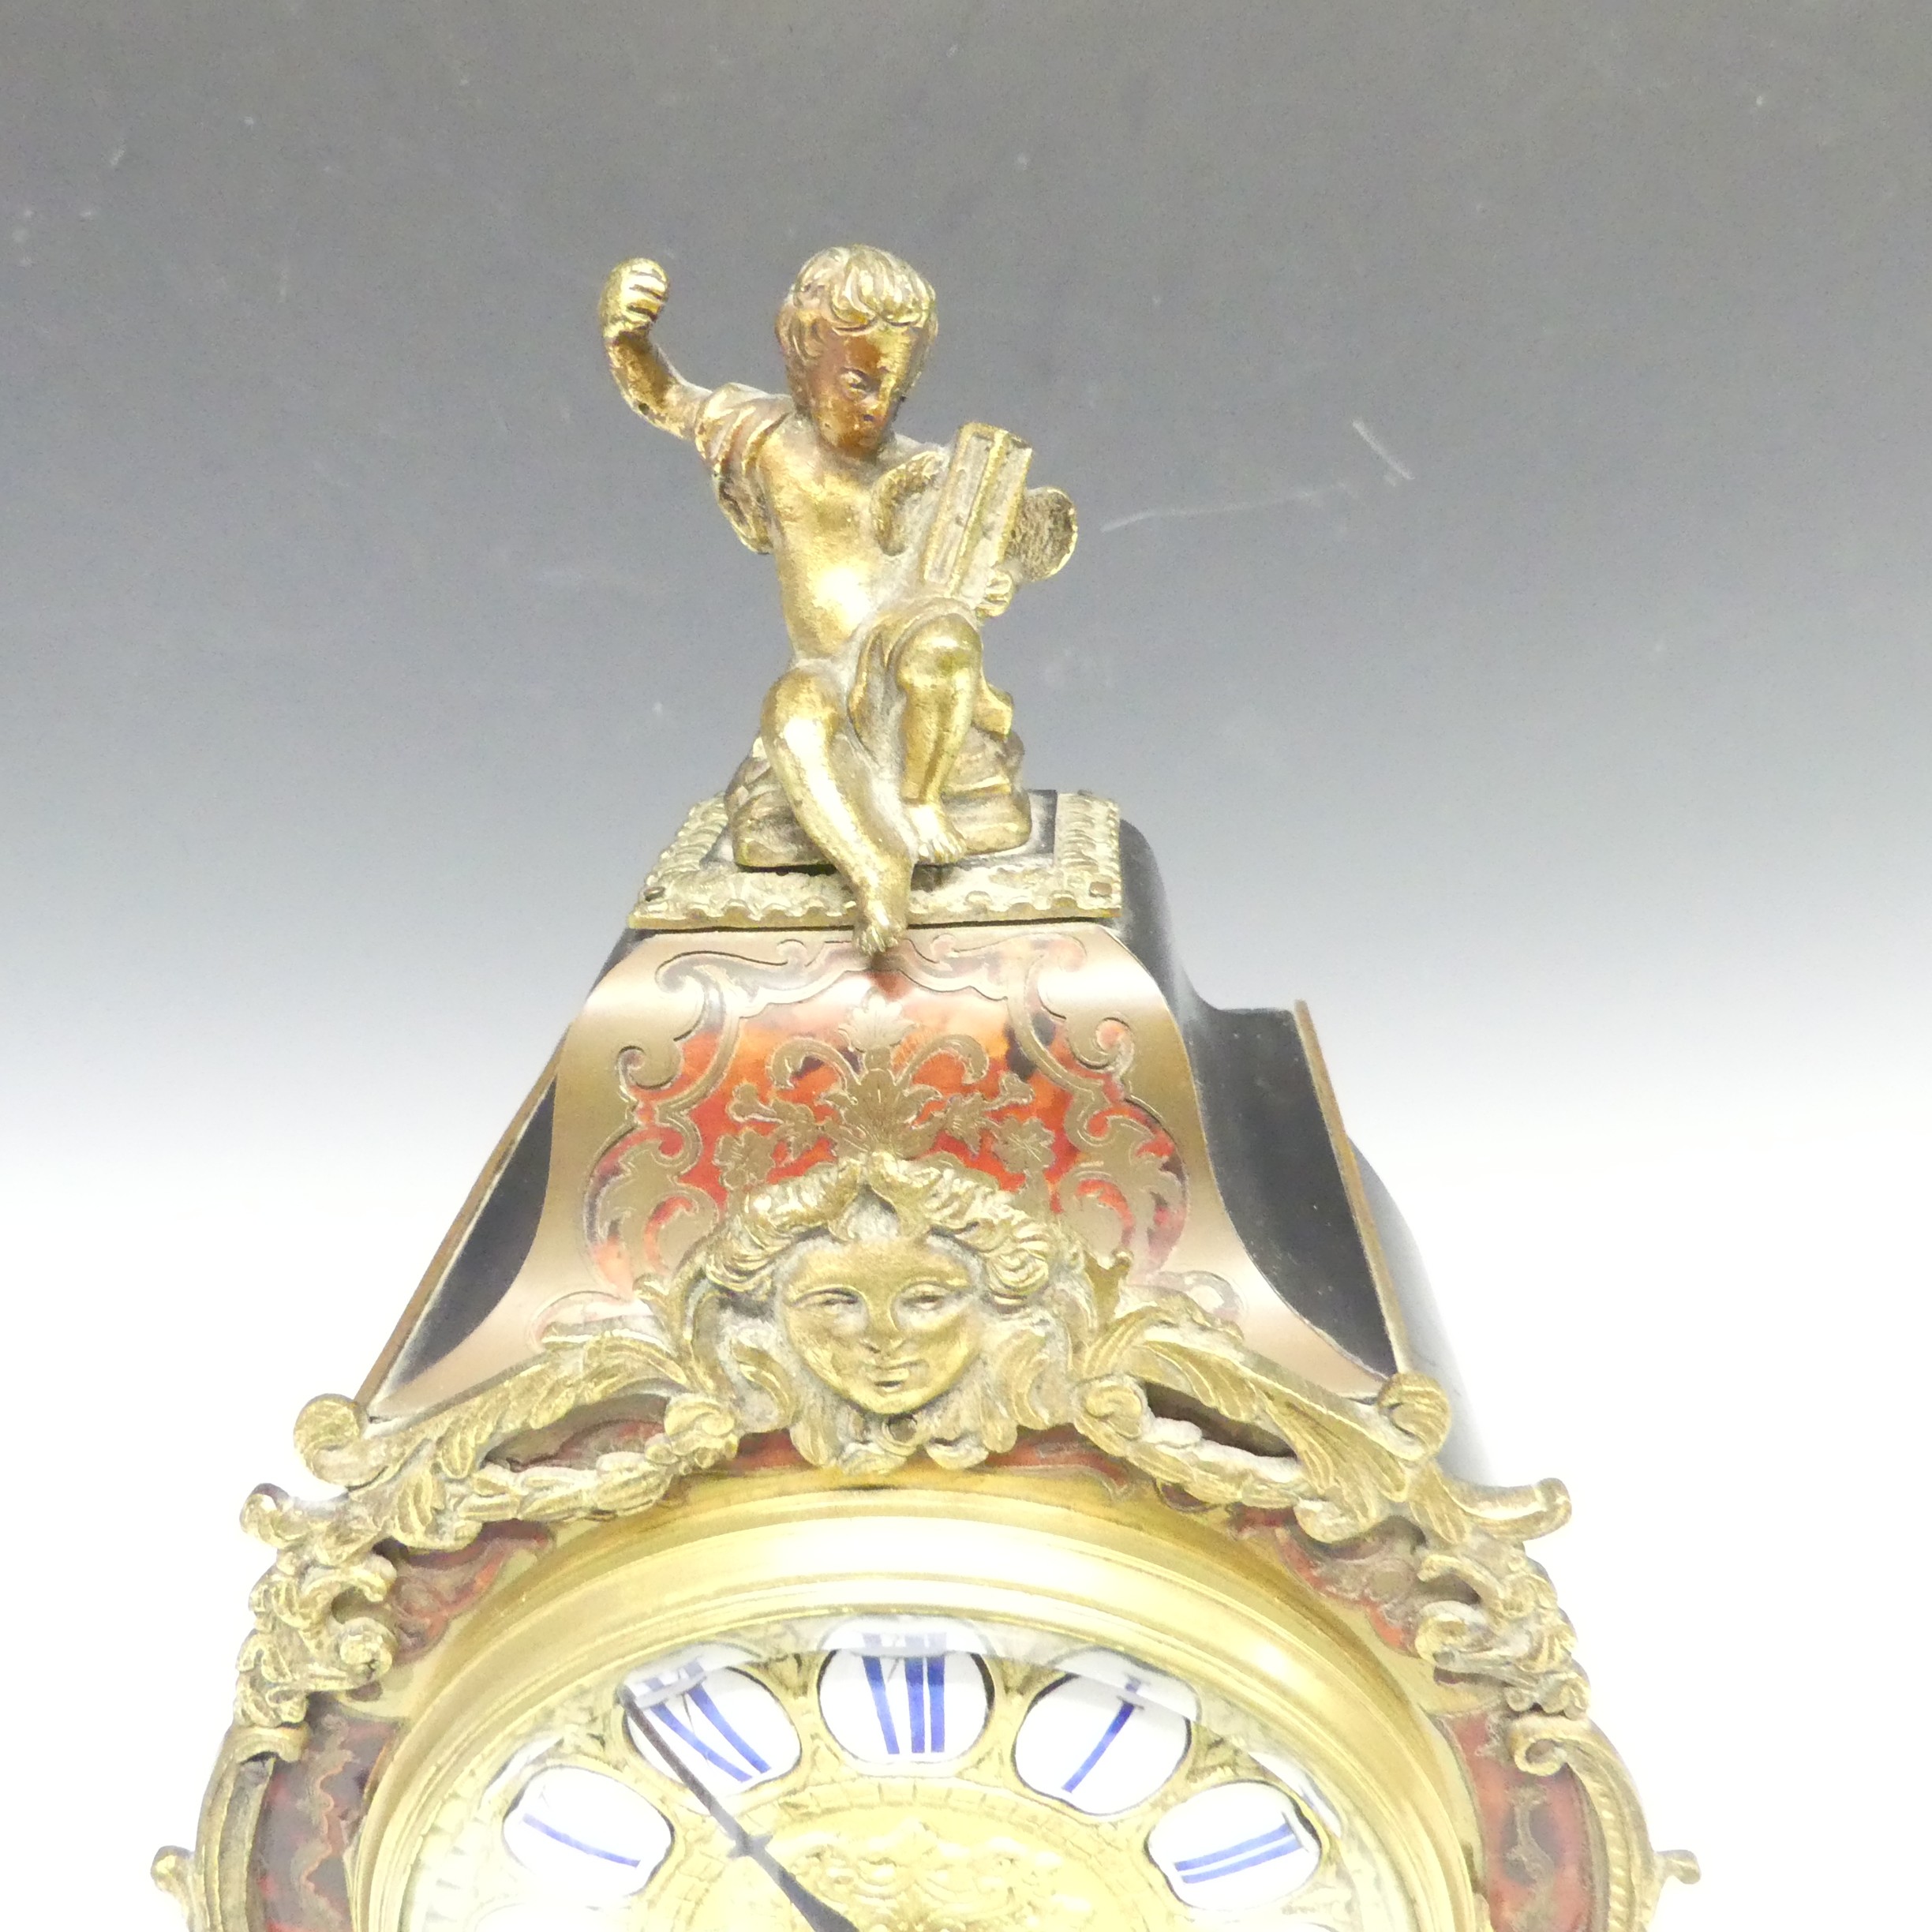 A late 19th century French Boulle work Mantel Clock, the elaborate case with tortoiseshell veneer, - Image 3 of 8